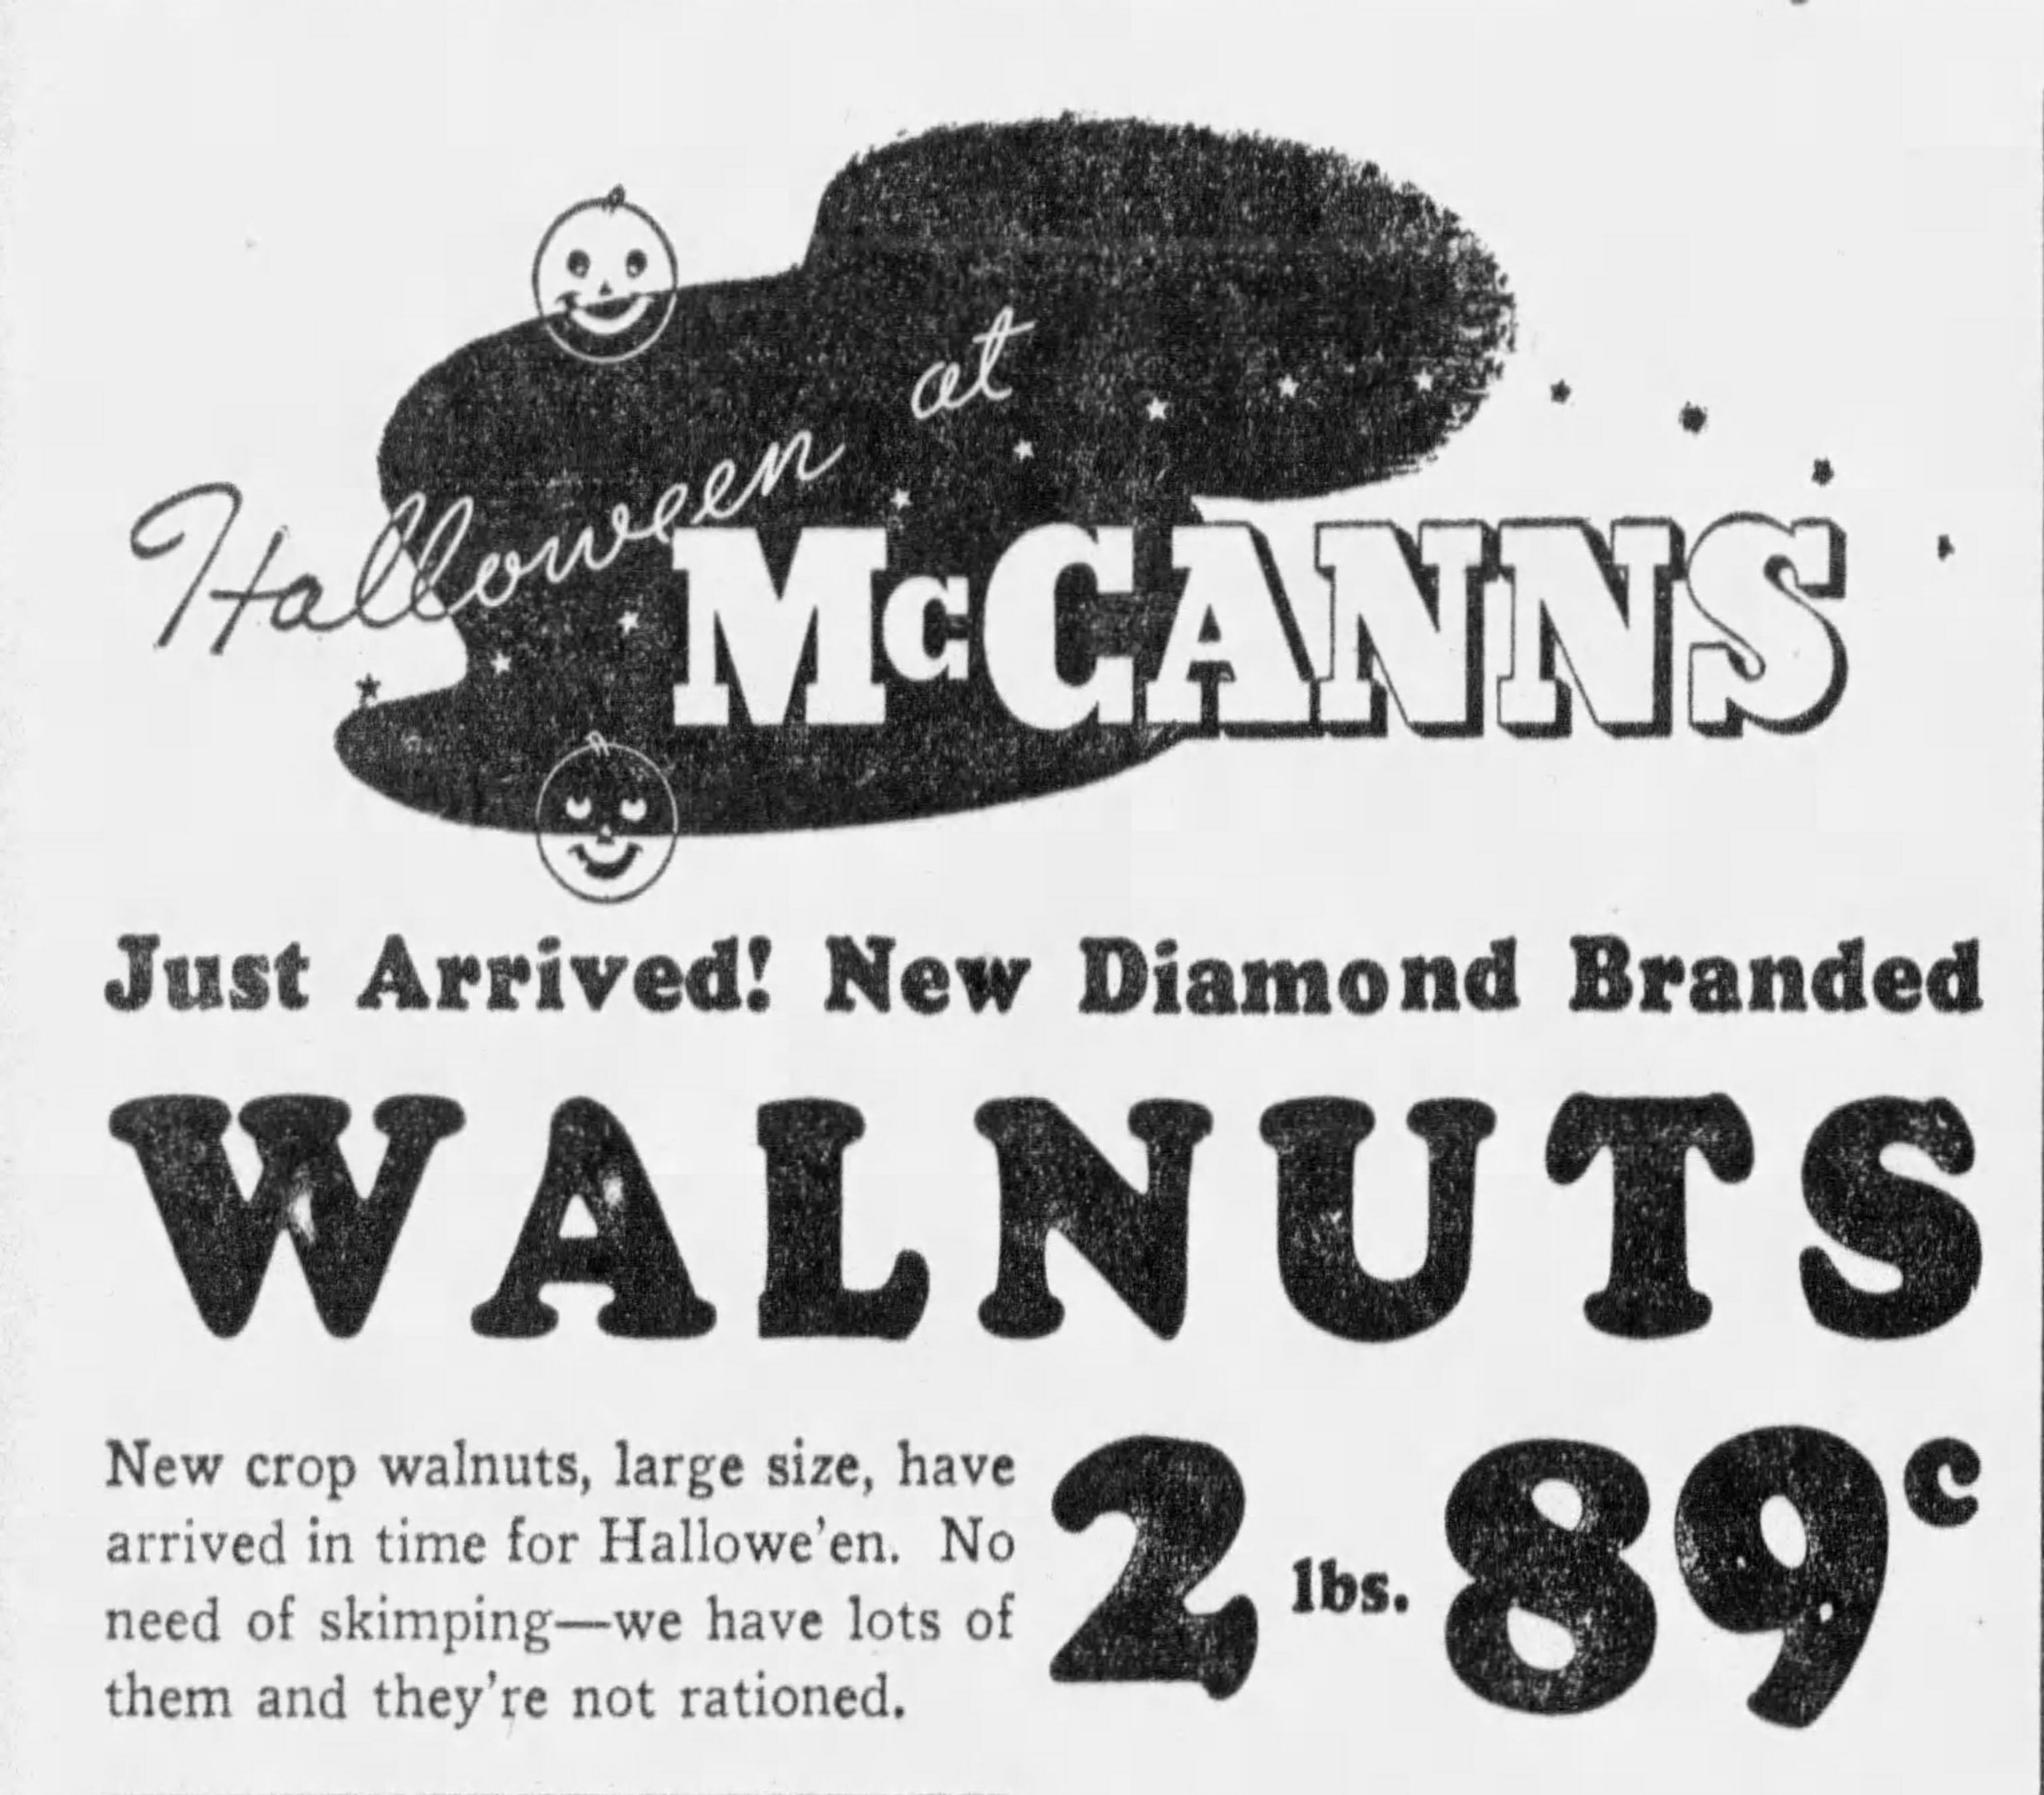 Advertisement for English walnuts, McCann’s supermarket, noting they are not rationed, 1943. Walnuts had a long history in American versions of Halloween, which was once known as “nutcrack night” because of divination games involving walnuts. Pittsburgh Sun-Telegraph, October 28, 1943.